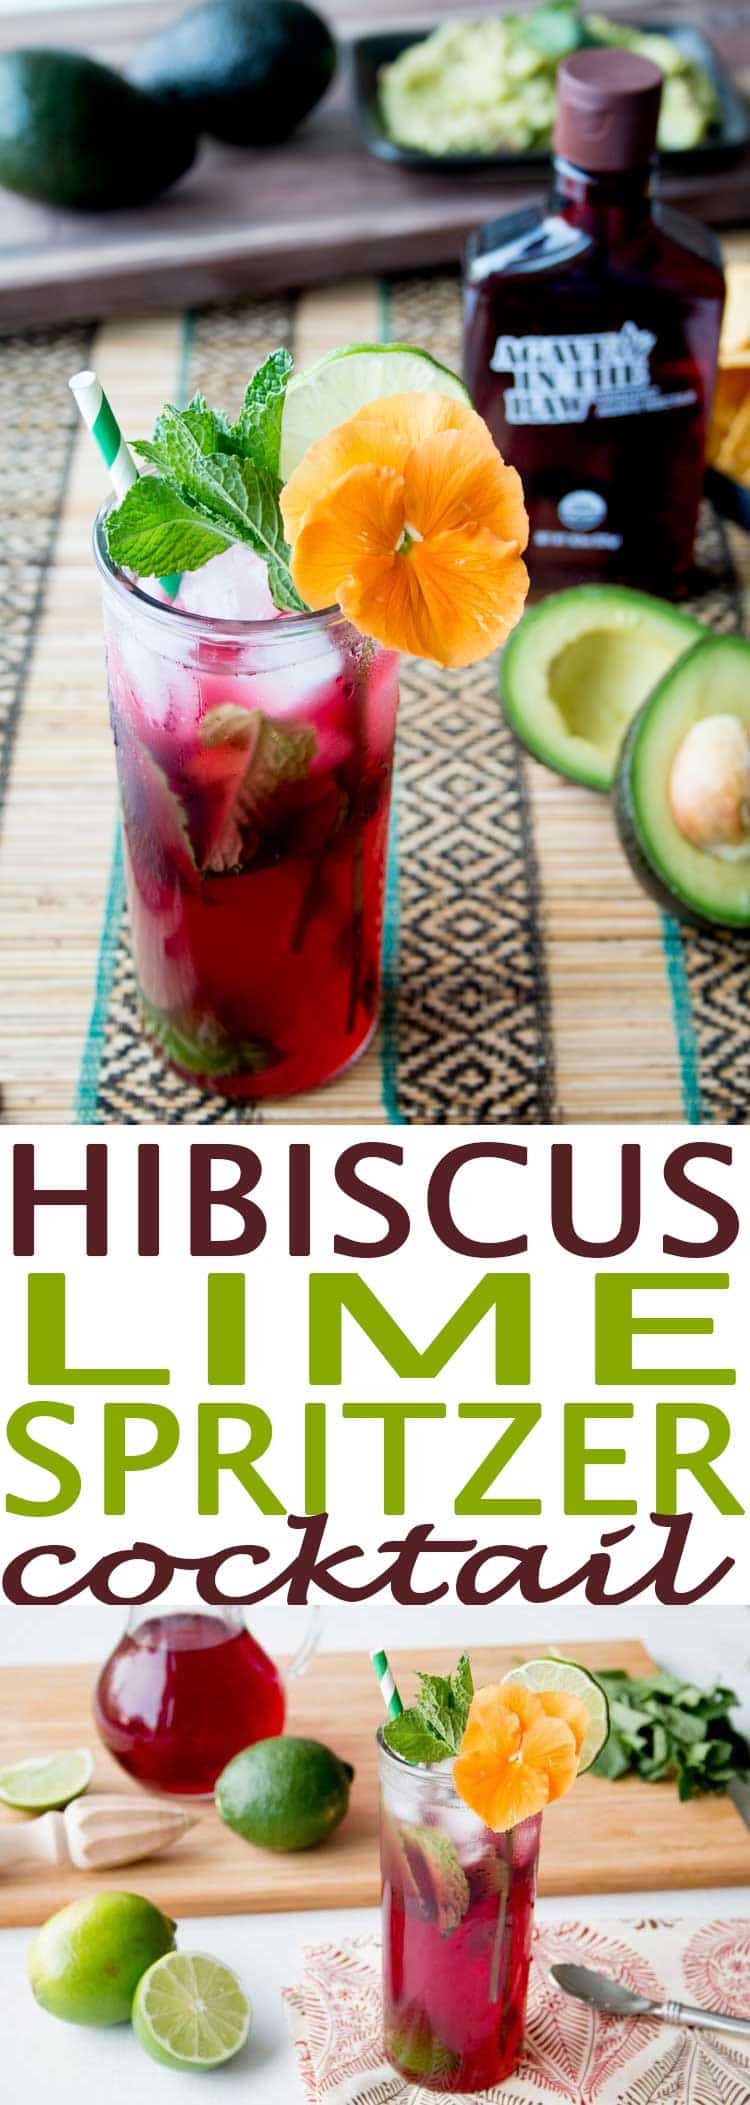 Hibiscus Lime Spritzer cocktail is a refreshing alcoholic beverage whose ingredients include foods with health benefits for colon health. 